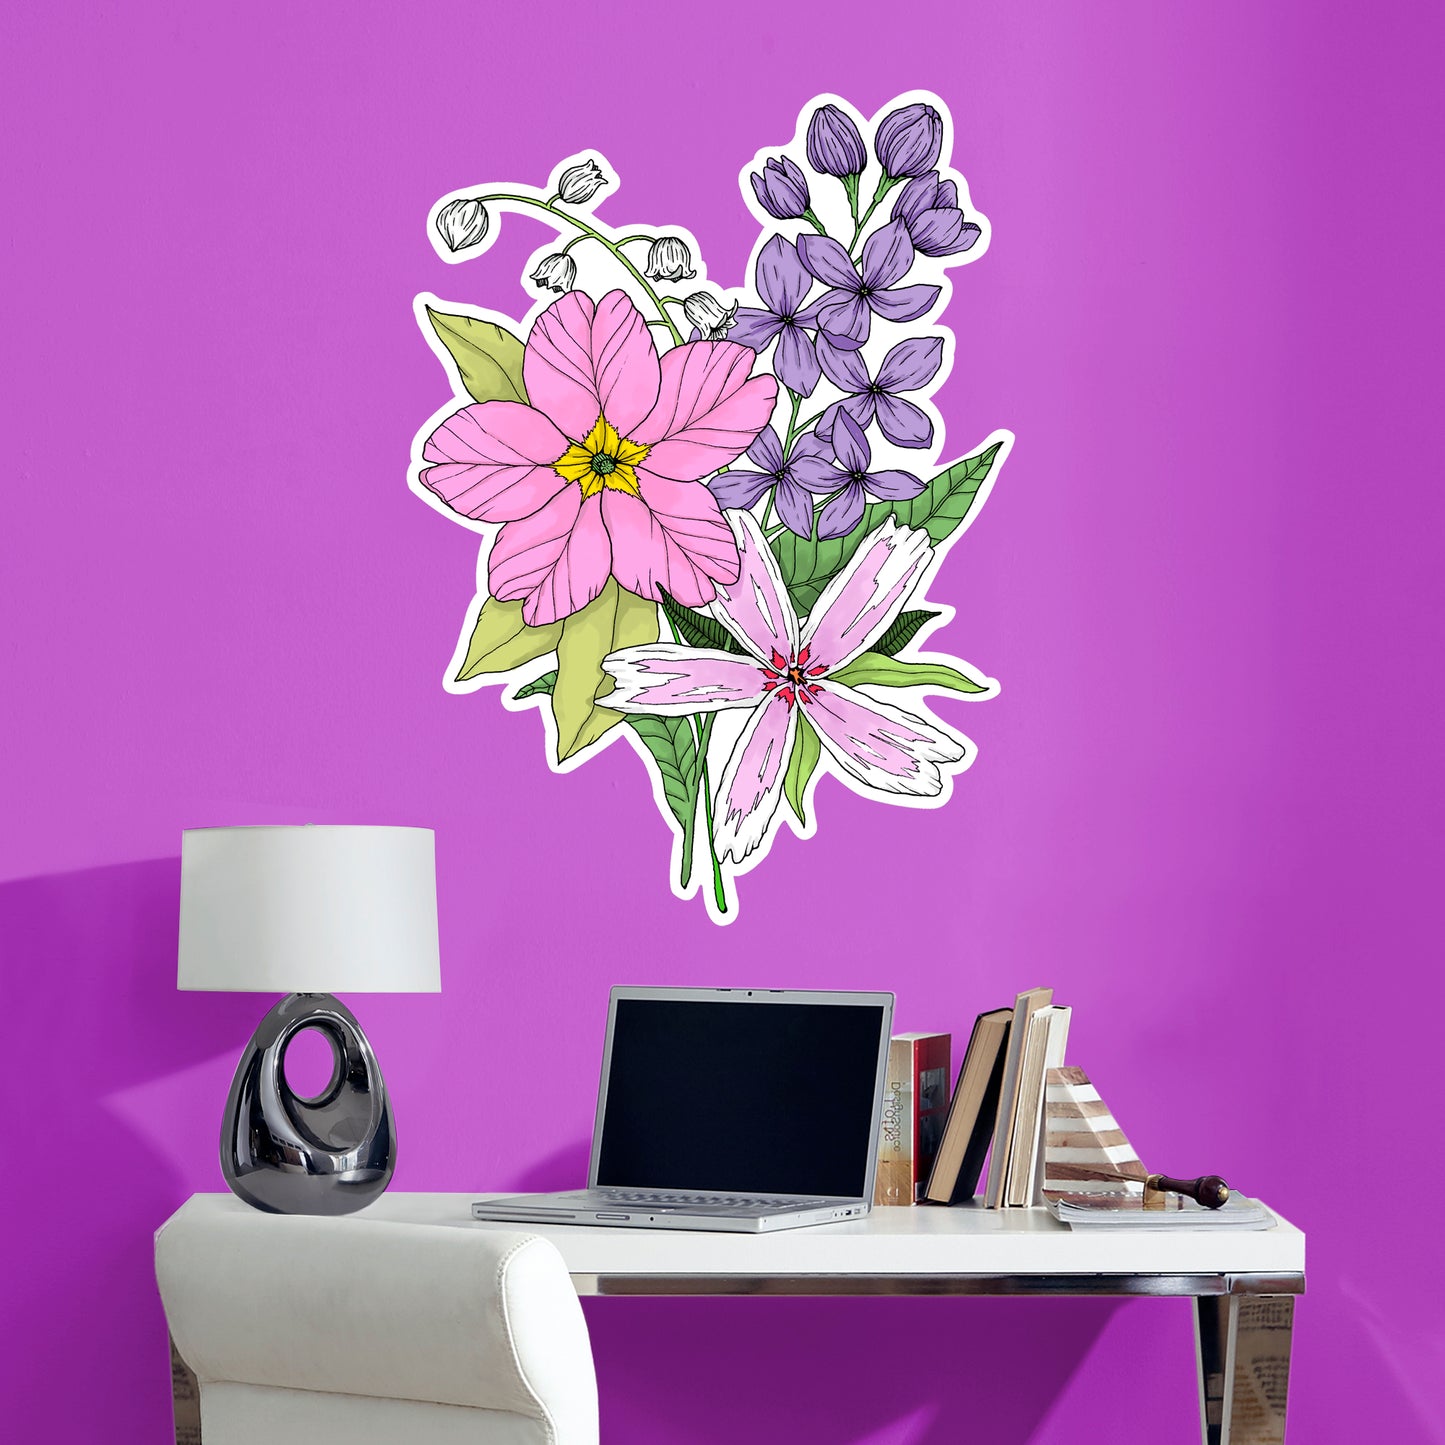 Giant Decal (50"W x 36"H)